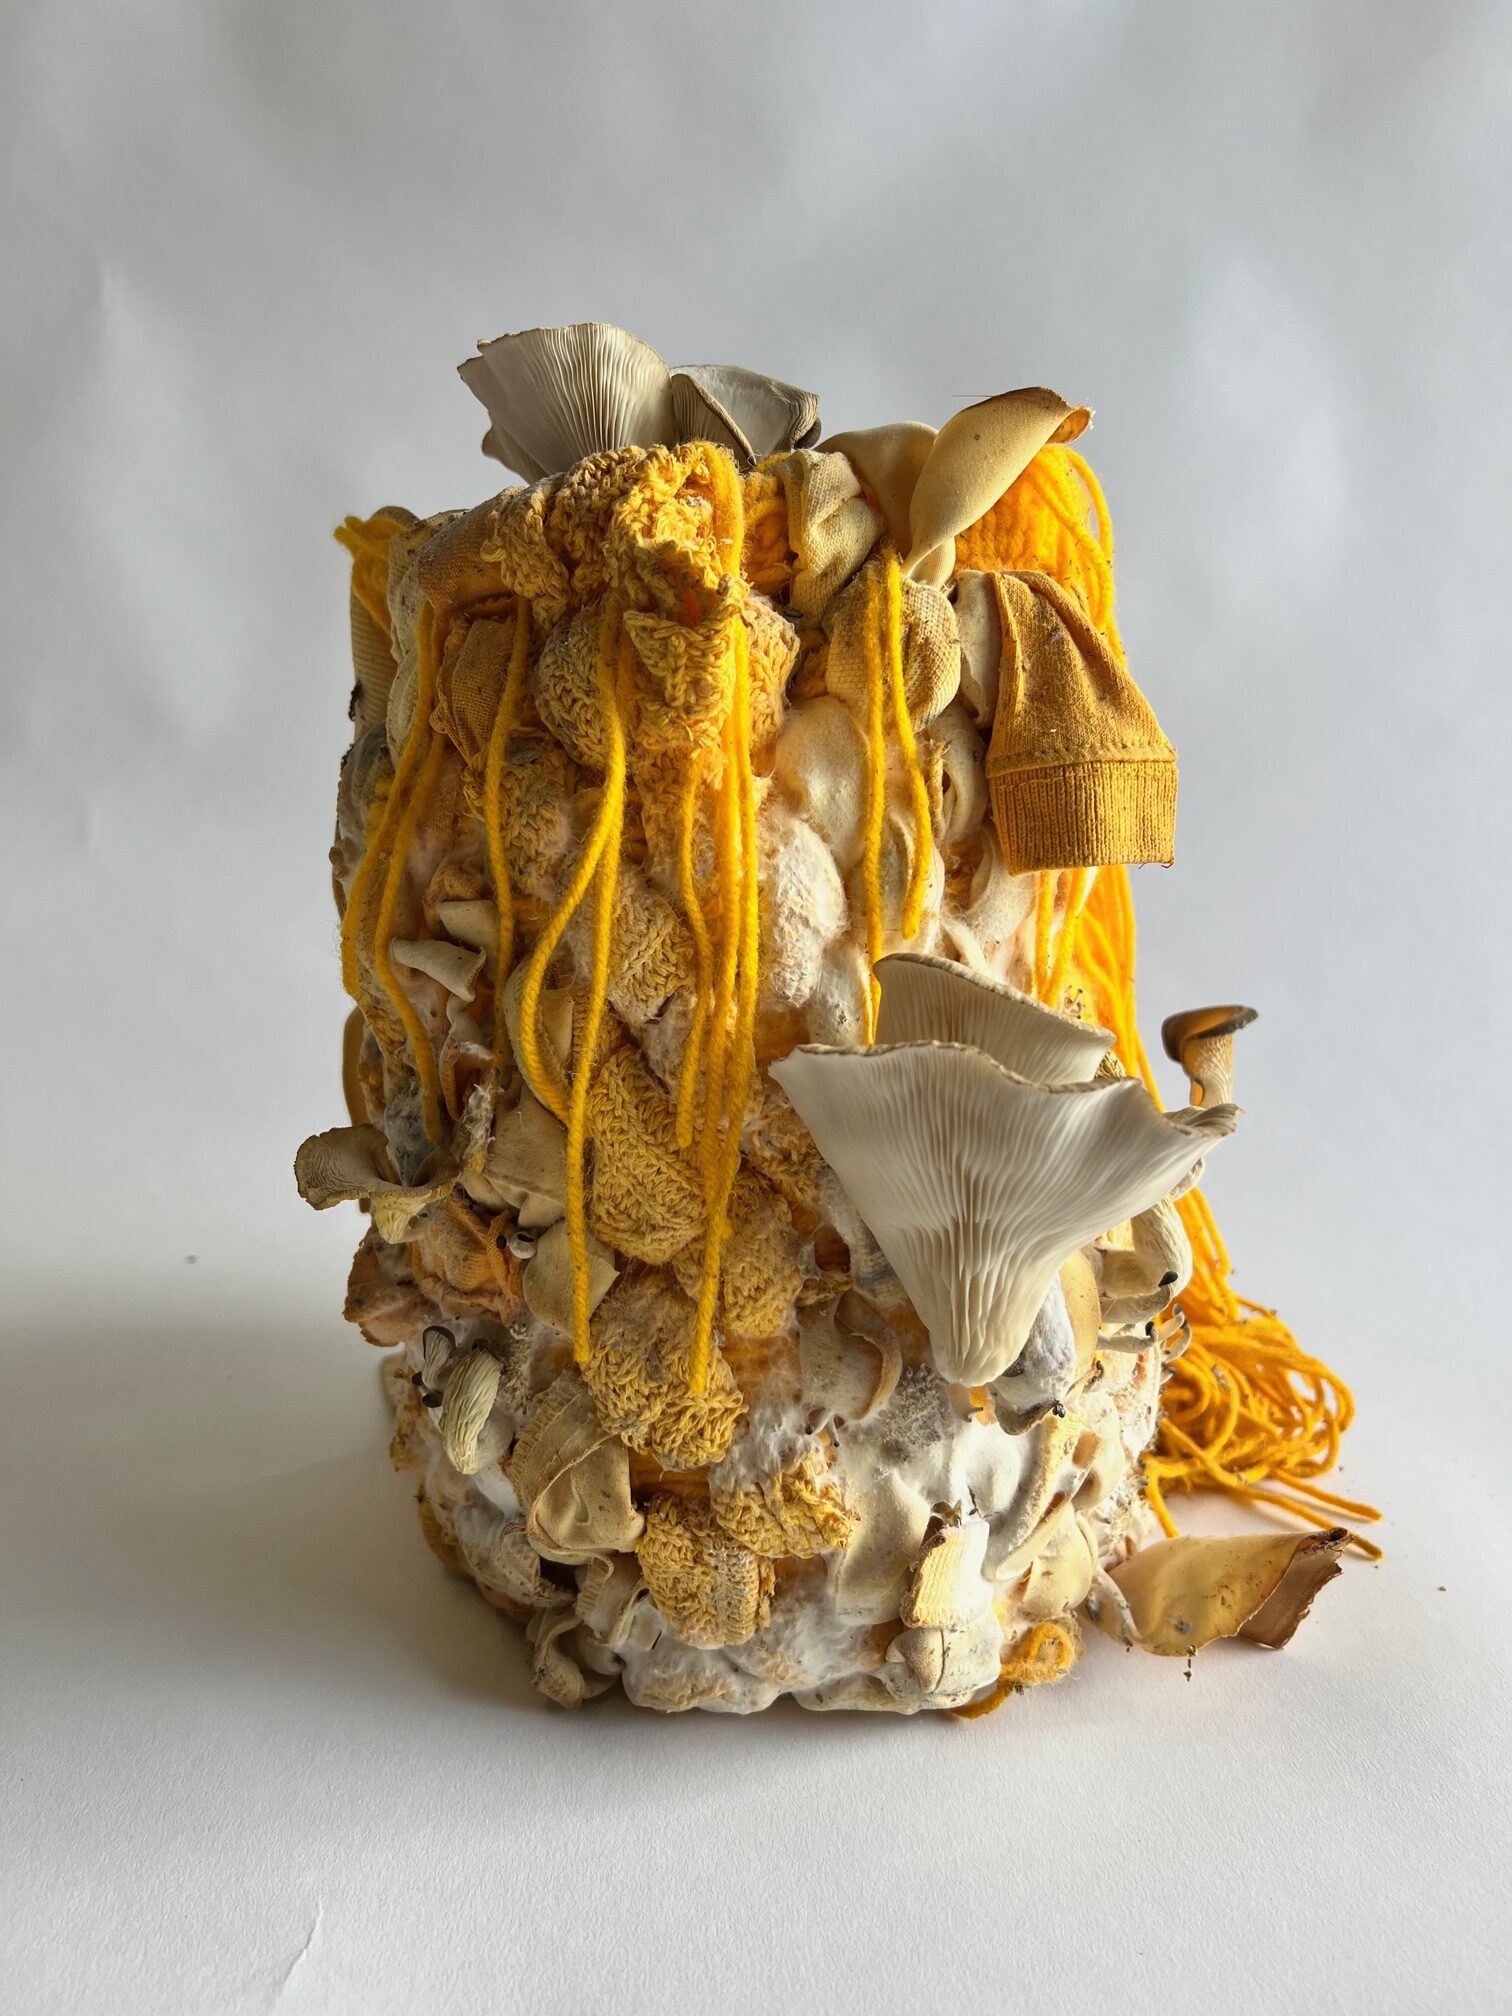 Re-dress_Minga Opazo_2021_Recylced textile and oyster mushroom mycelium_pigment print_edition of 5 + Ap_ 24 x 20 in unframed_Collection of the artist